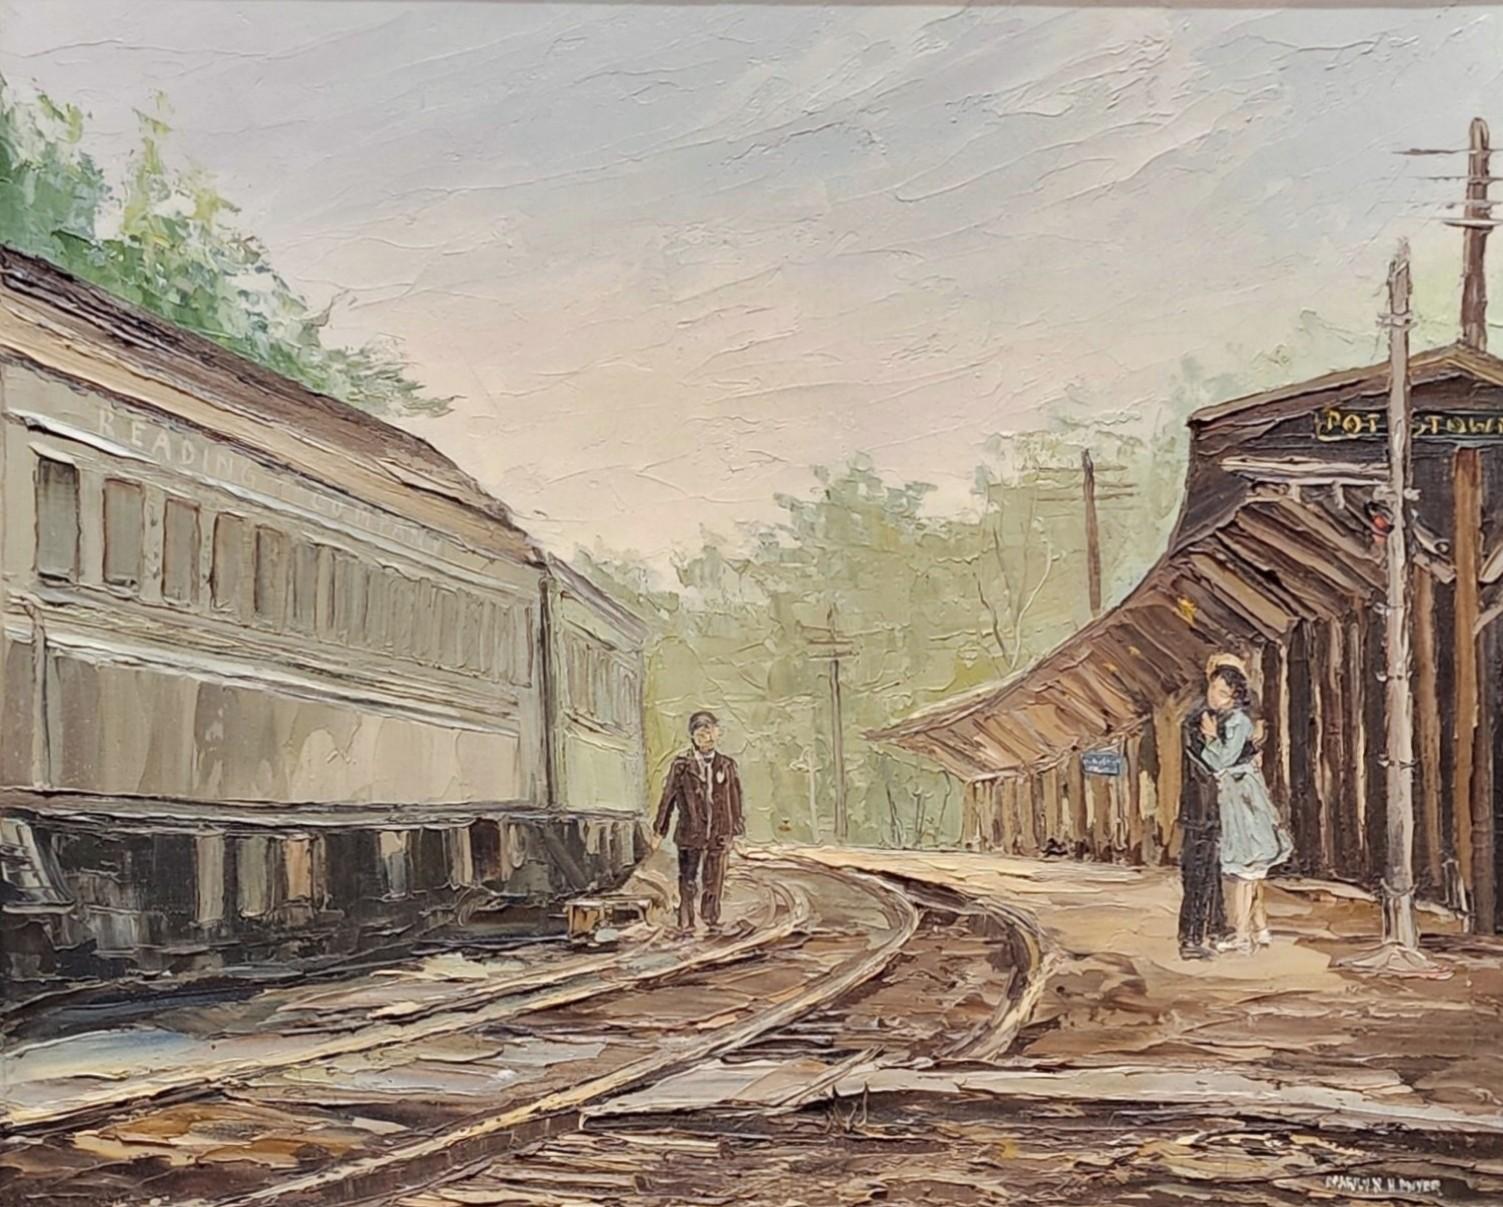 Until Next Time, Pottstown, Pennsylvania Train Station, Lovers Say Goodbye - Painting by Marilyn H. Dwyer